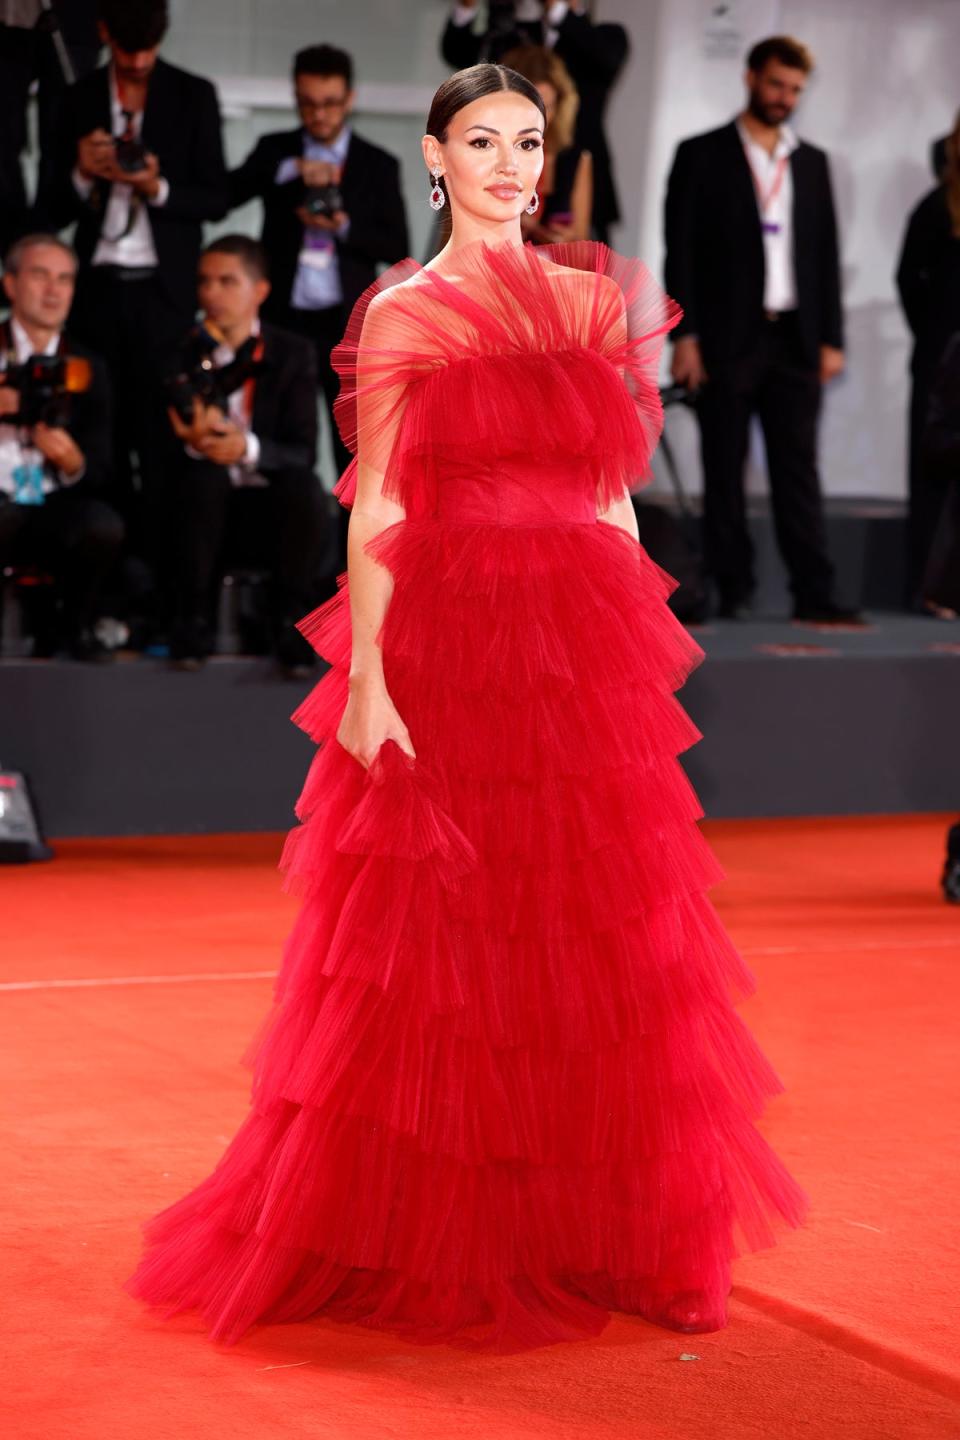 Francesca Tizzano at the 2022 Venice Film Festival (Getty Images for Netflix)